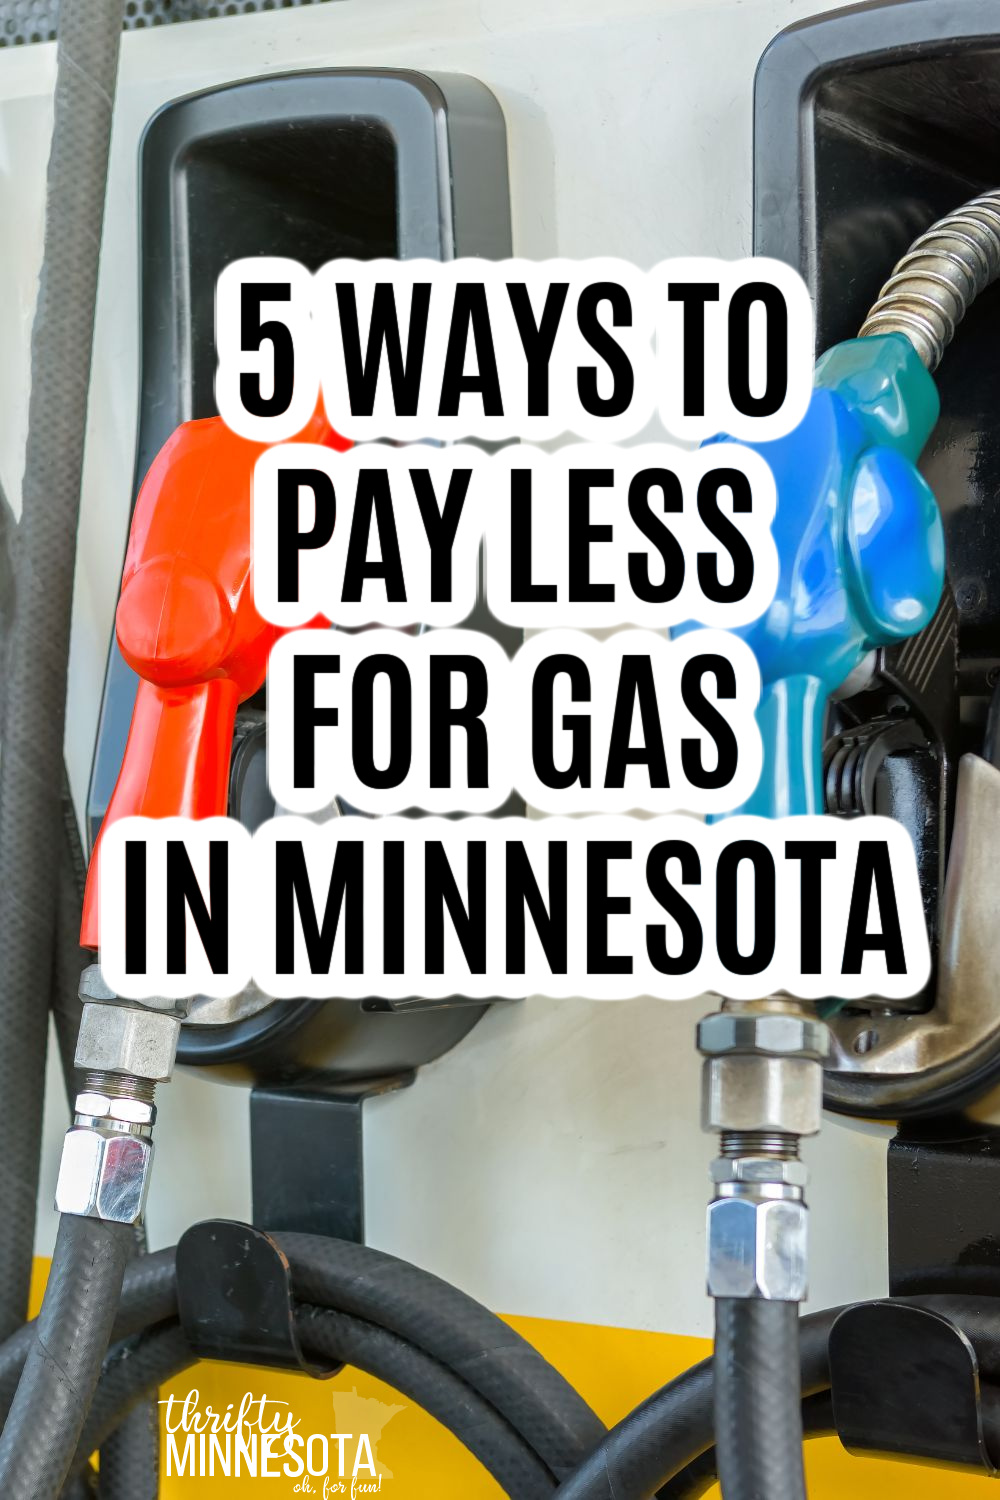 5 Ways to Pay Less for Gas in Minnesota